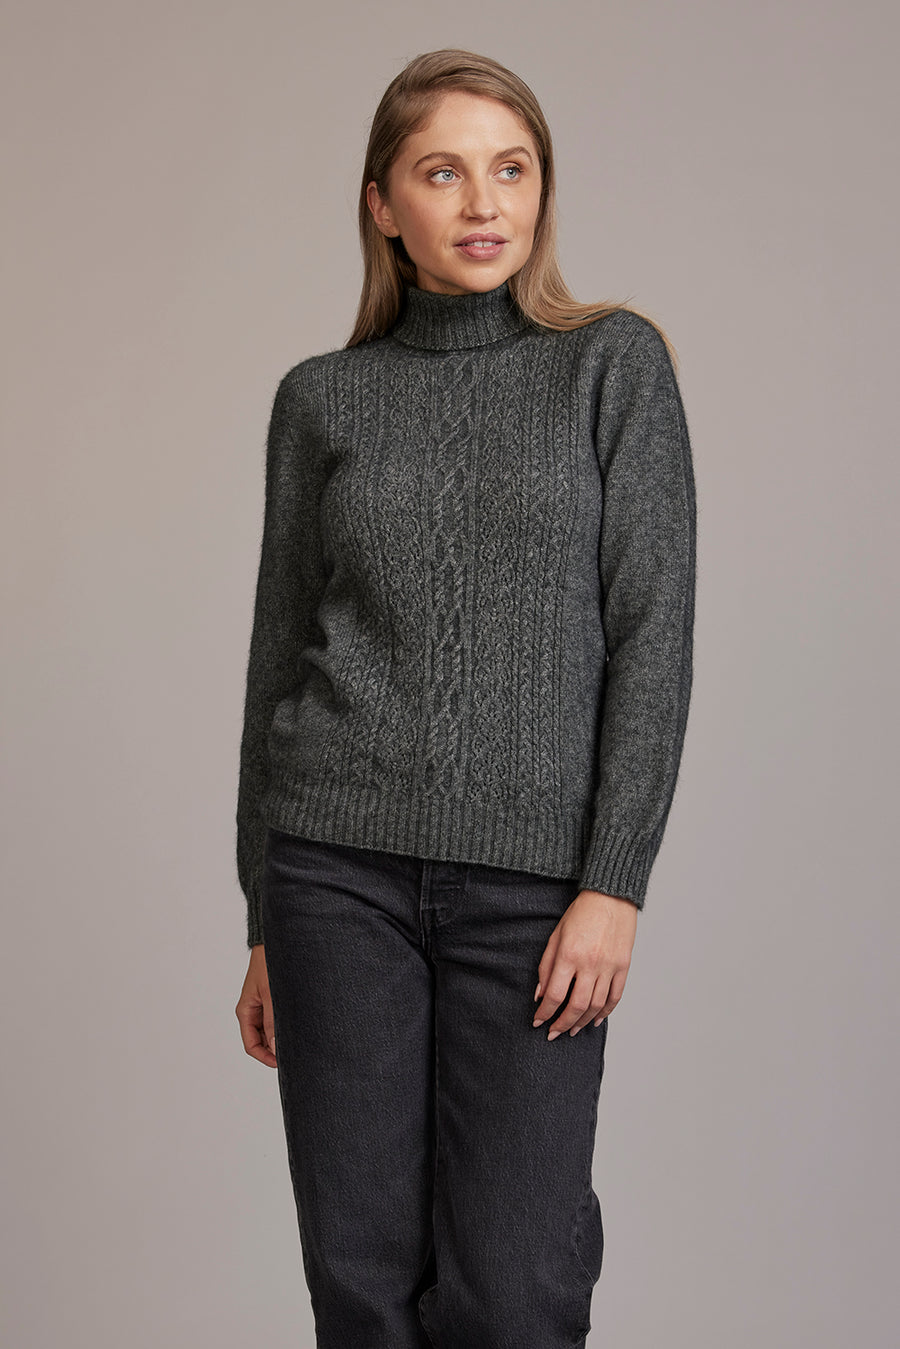 Polo Neck with Lace Detail